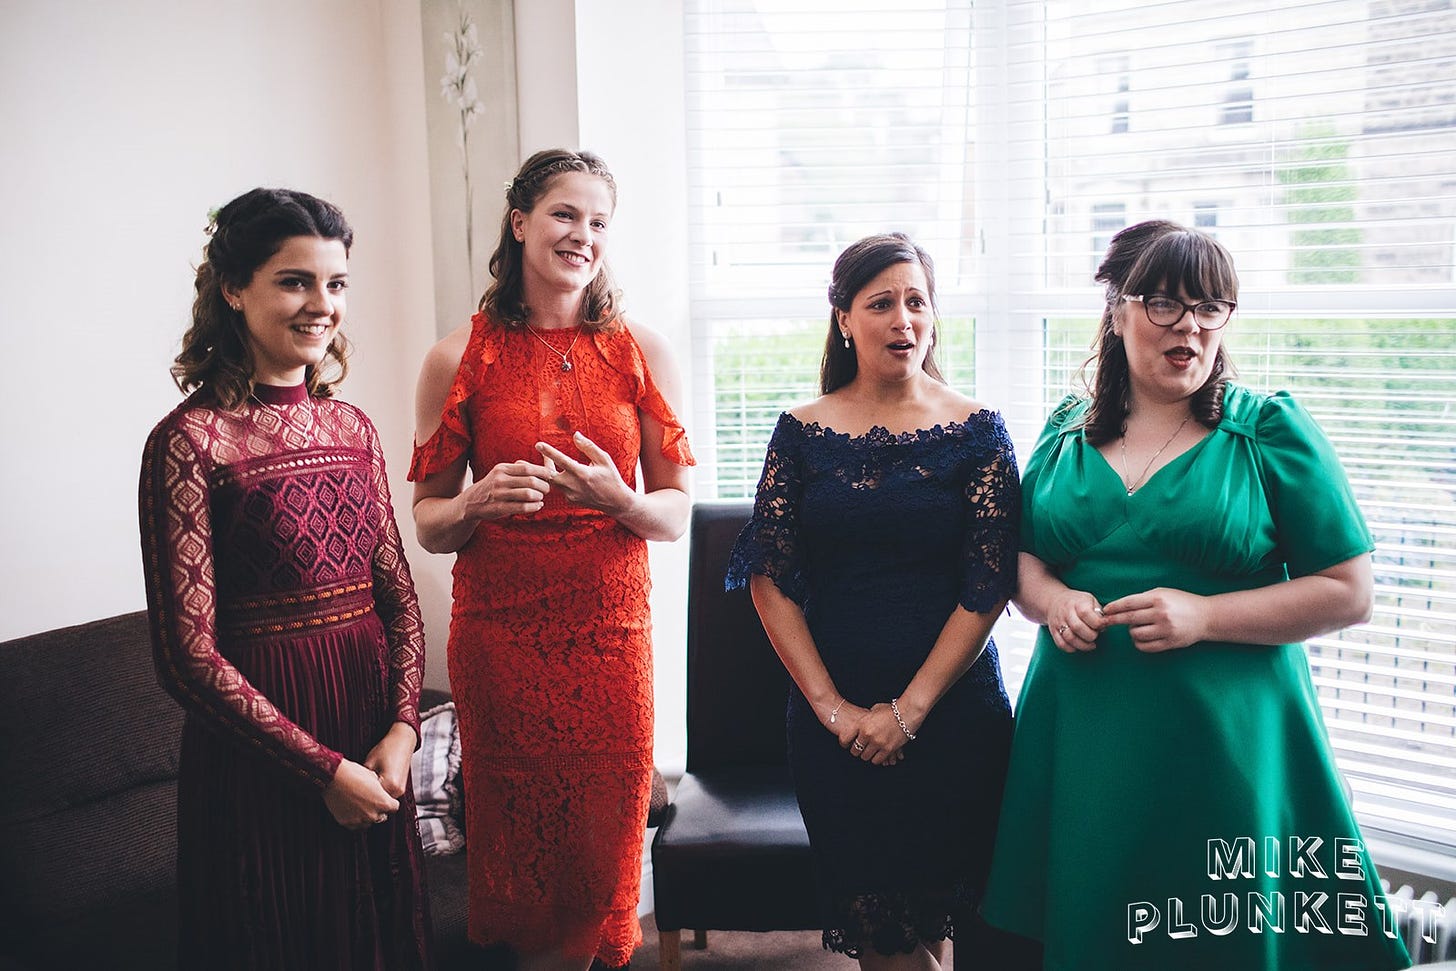 Four women in bright coloured dresses reacting to seeing the bride for the first time just out of shot. Smiles/ emotion on their faces